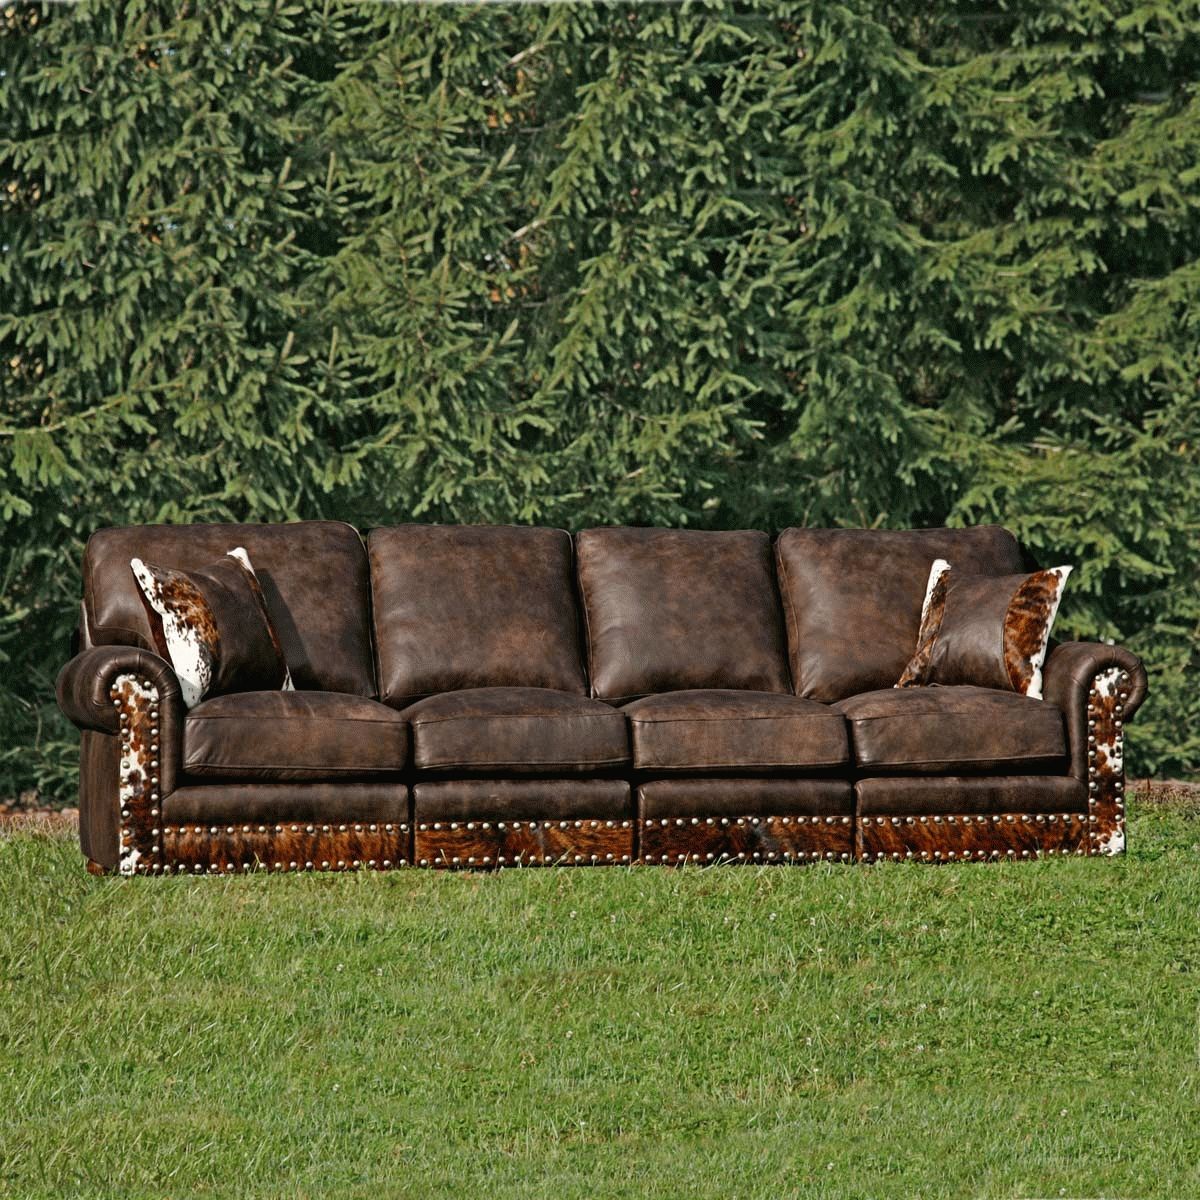 Western Furniture: Hinsdale Stallone Sectional Sofa With Hair On Inside Western Style Sectional Sofas (View 26 of 30)